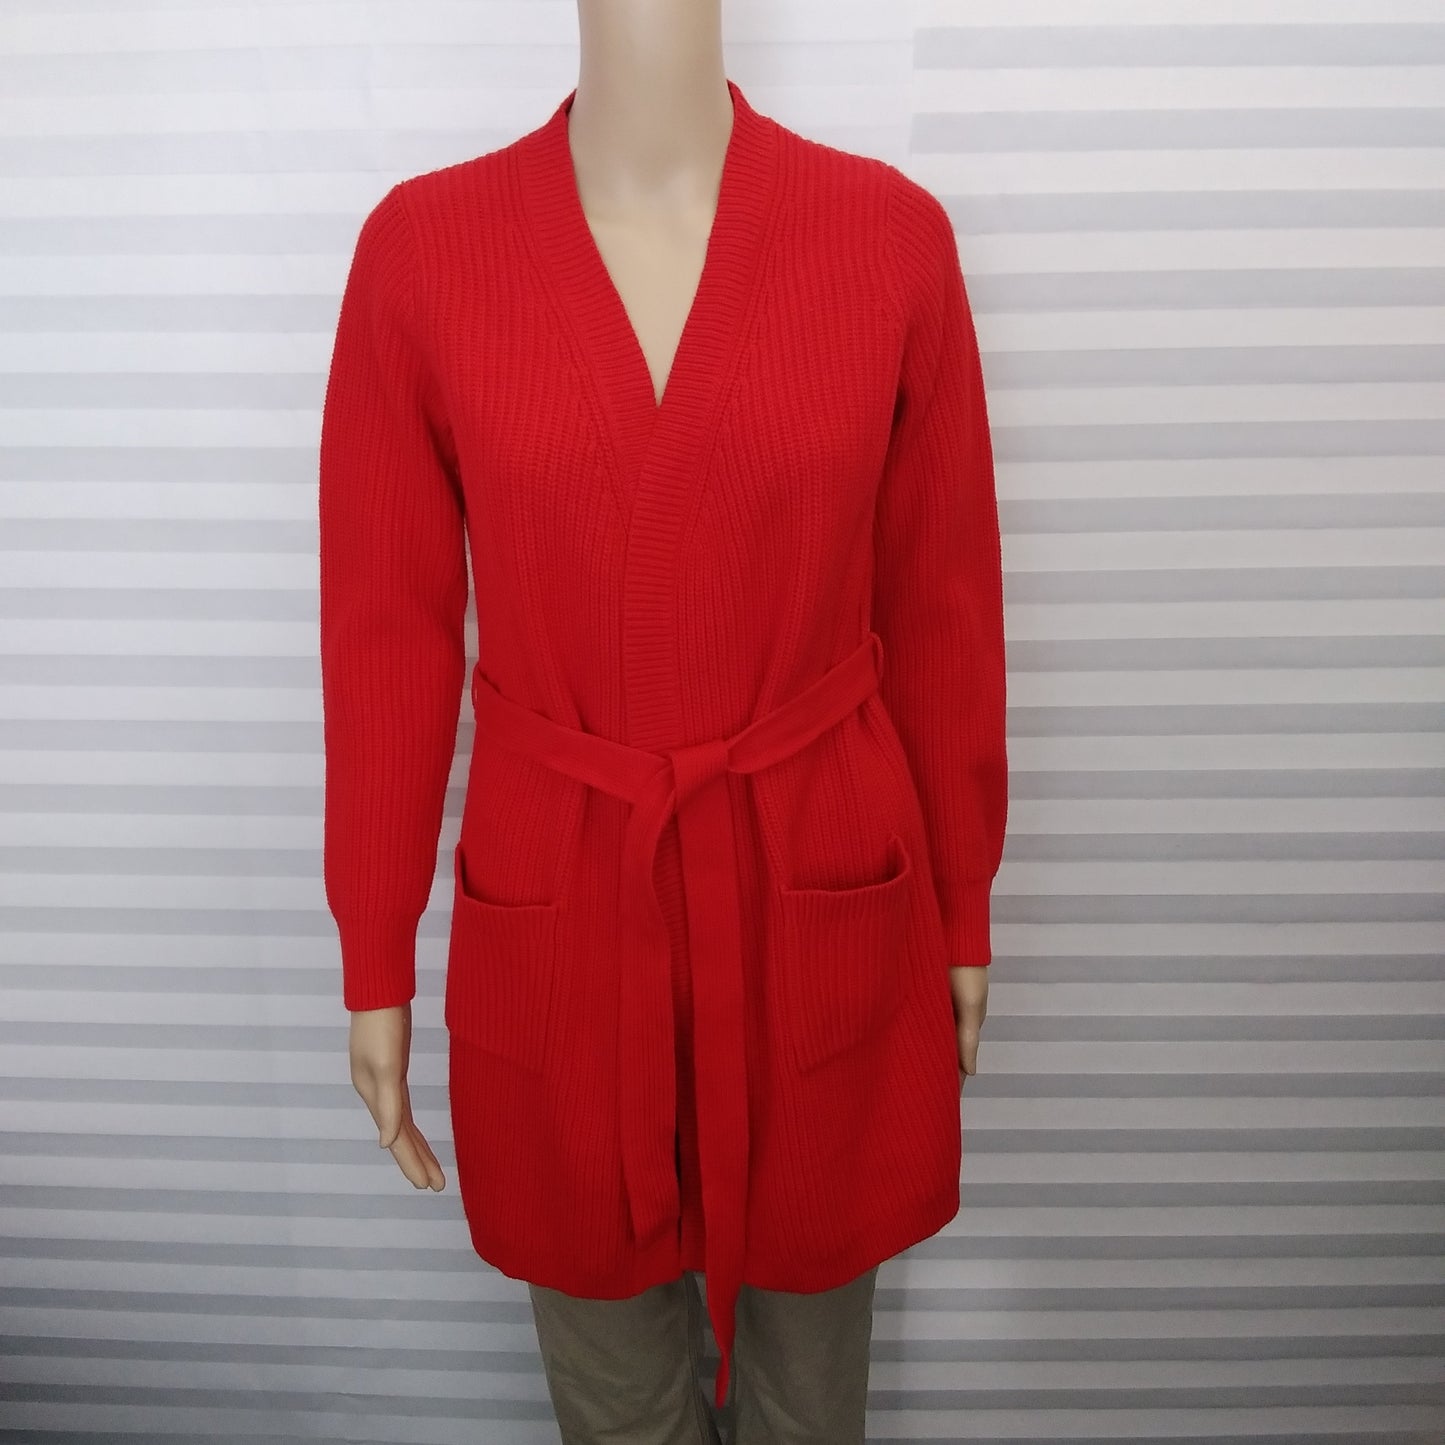 Boden Red Tie-Waist Ribbed Cardigan Sweater - Size S